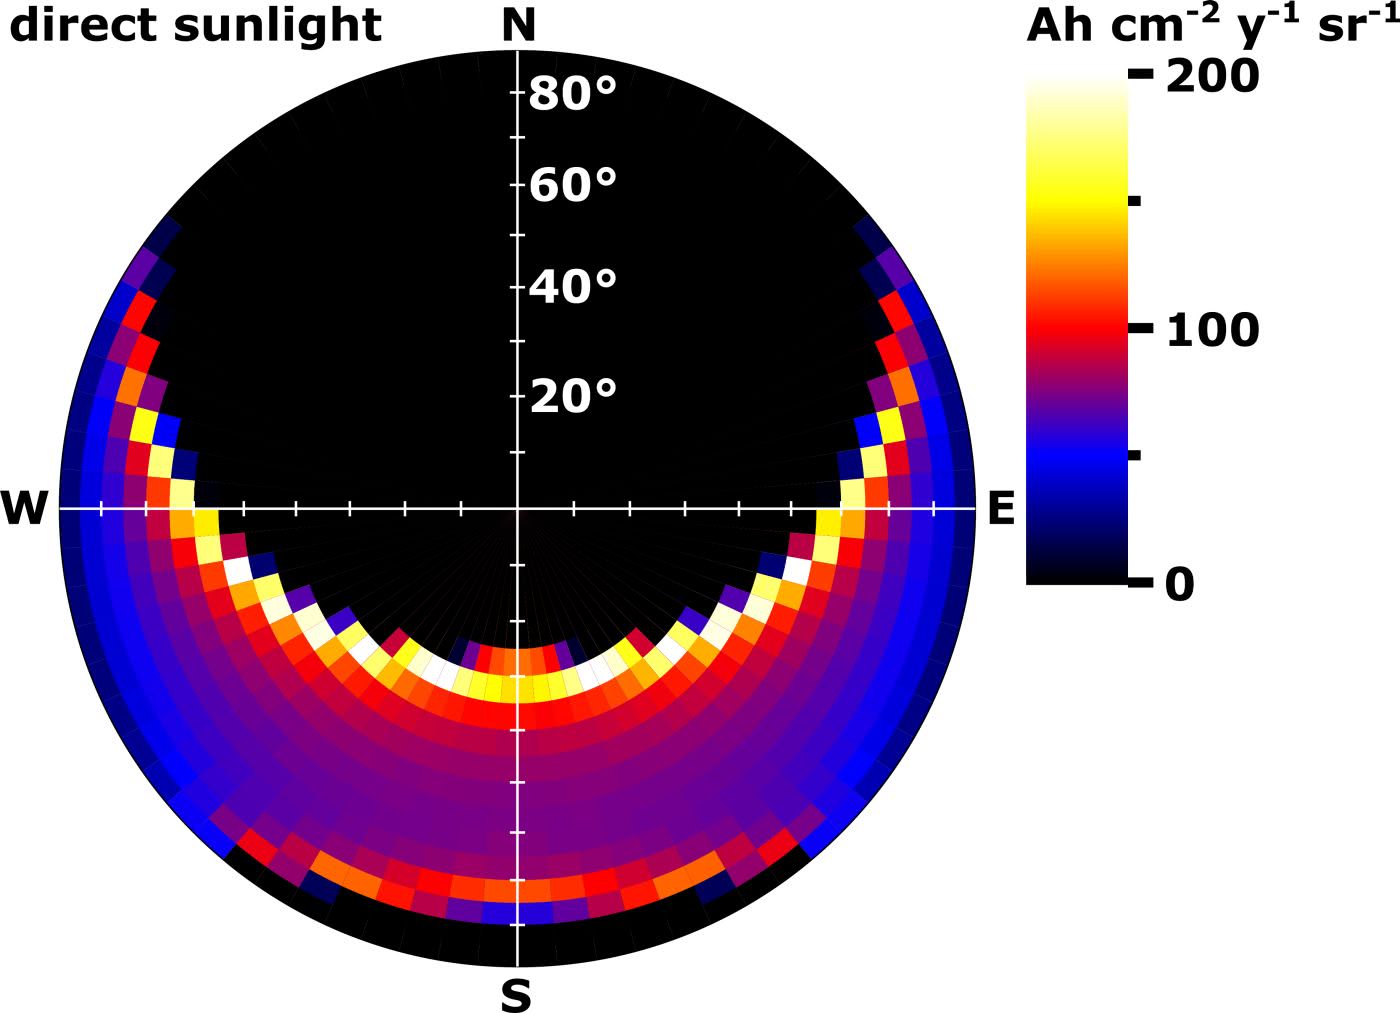 Photon flux, integrated over all wavelengths and binned, as calculated empirically for 14 years of irradiance measurements in Hamelin, Germany.